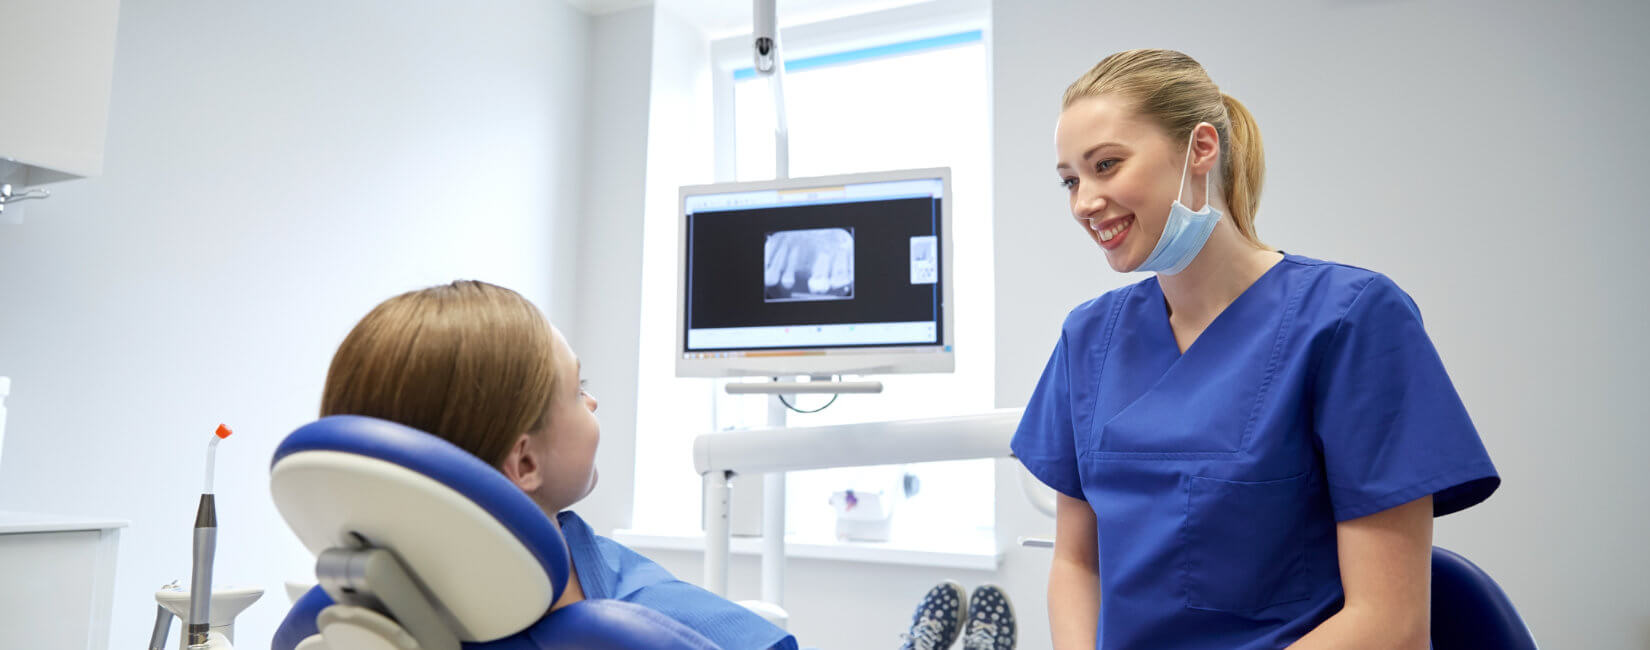 Level 3 safeguarding training suitable for dentists